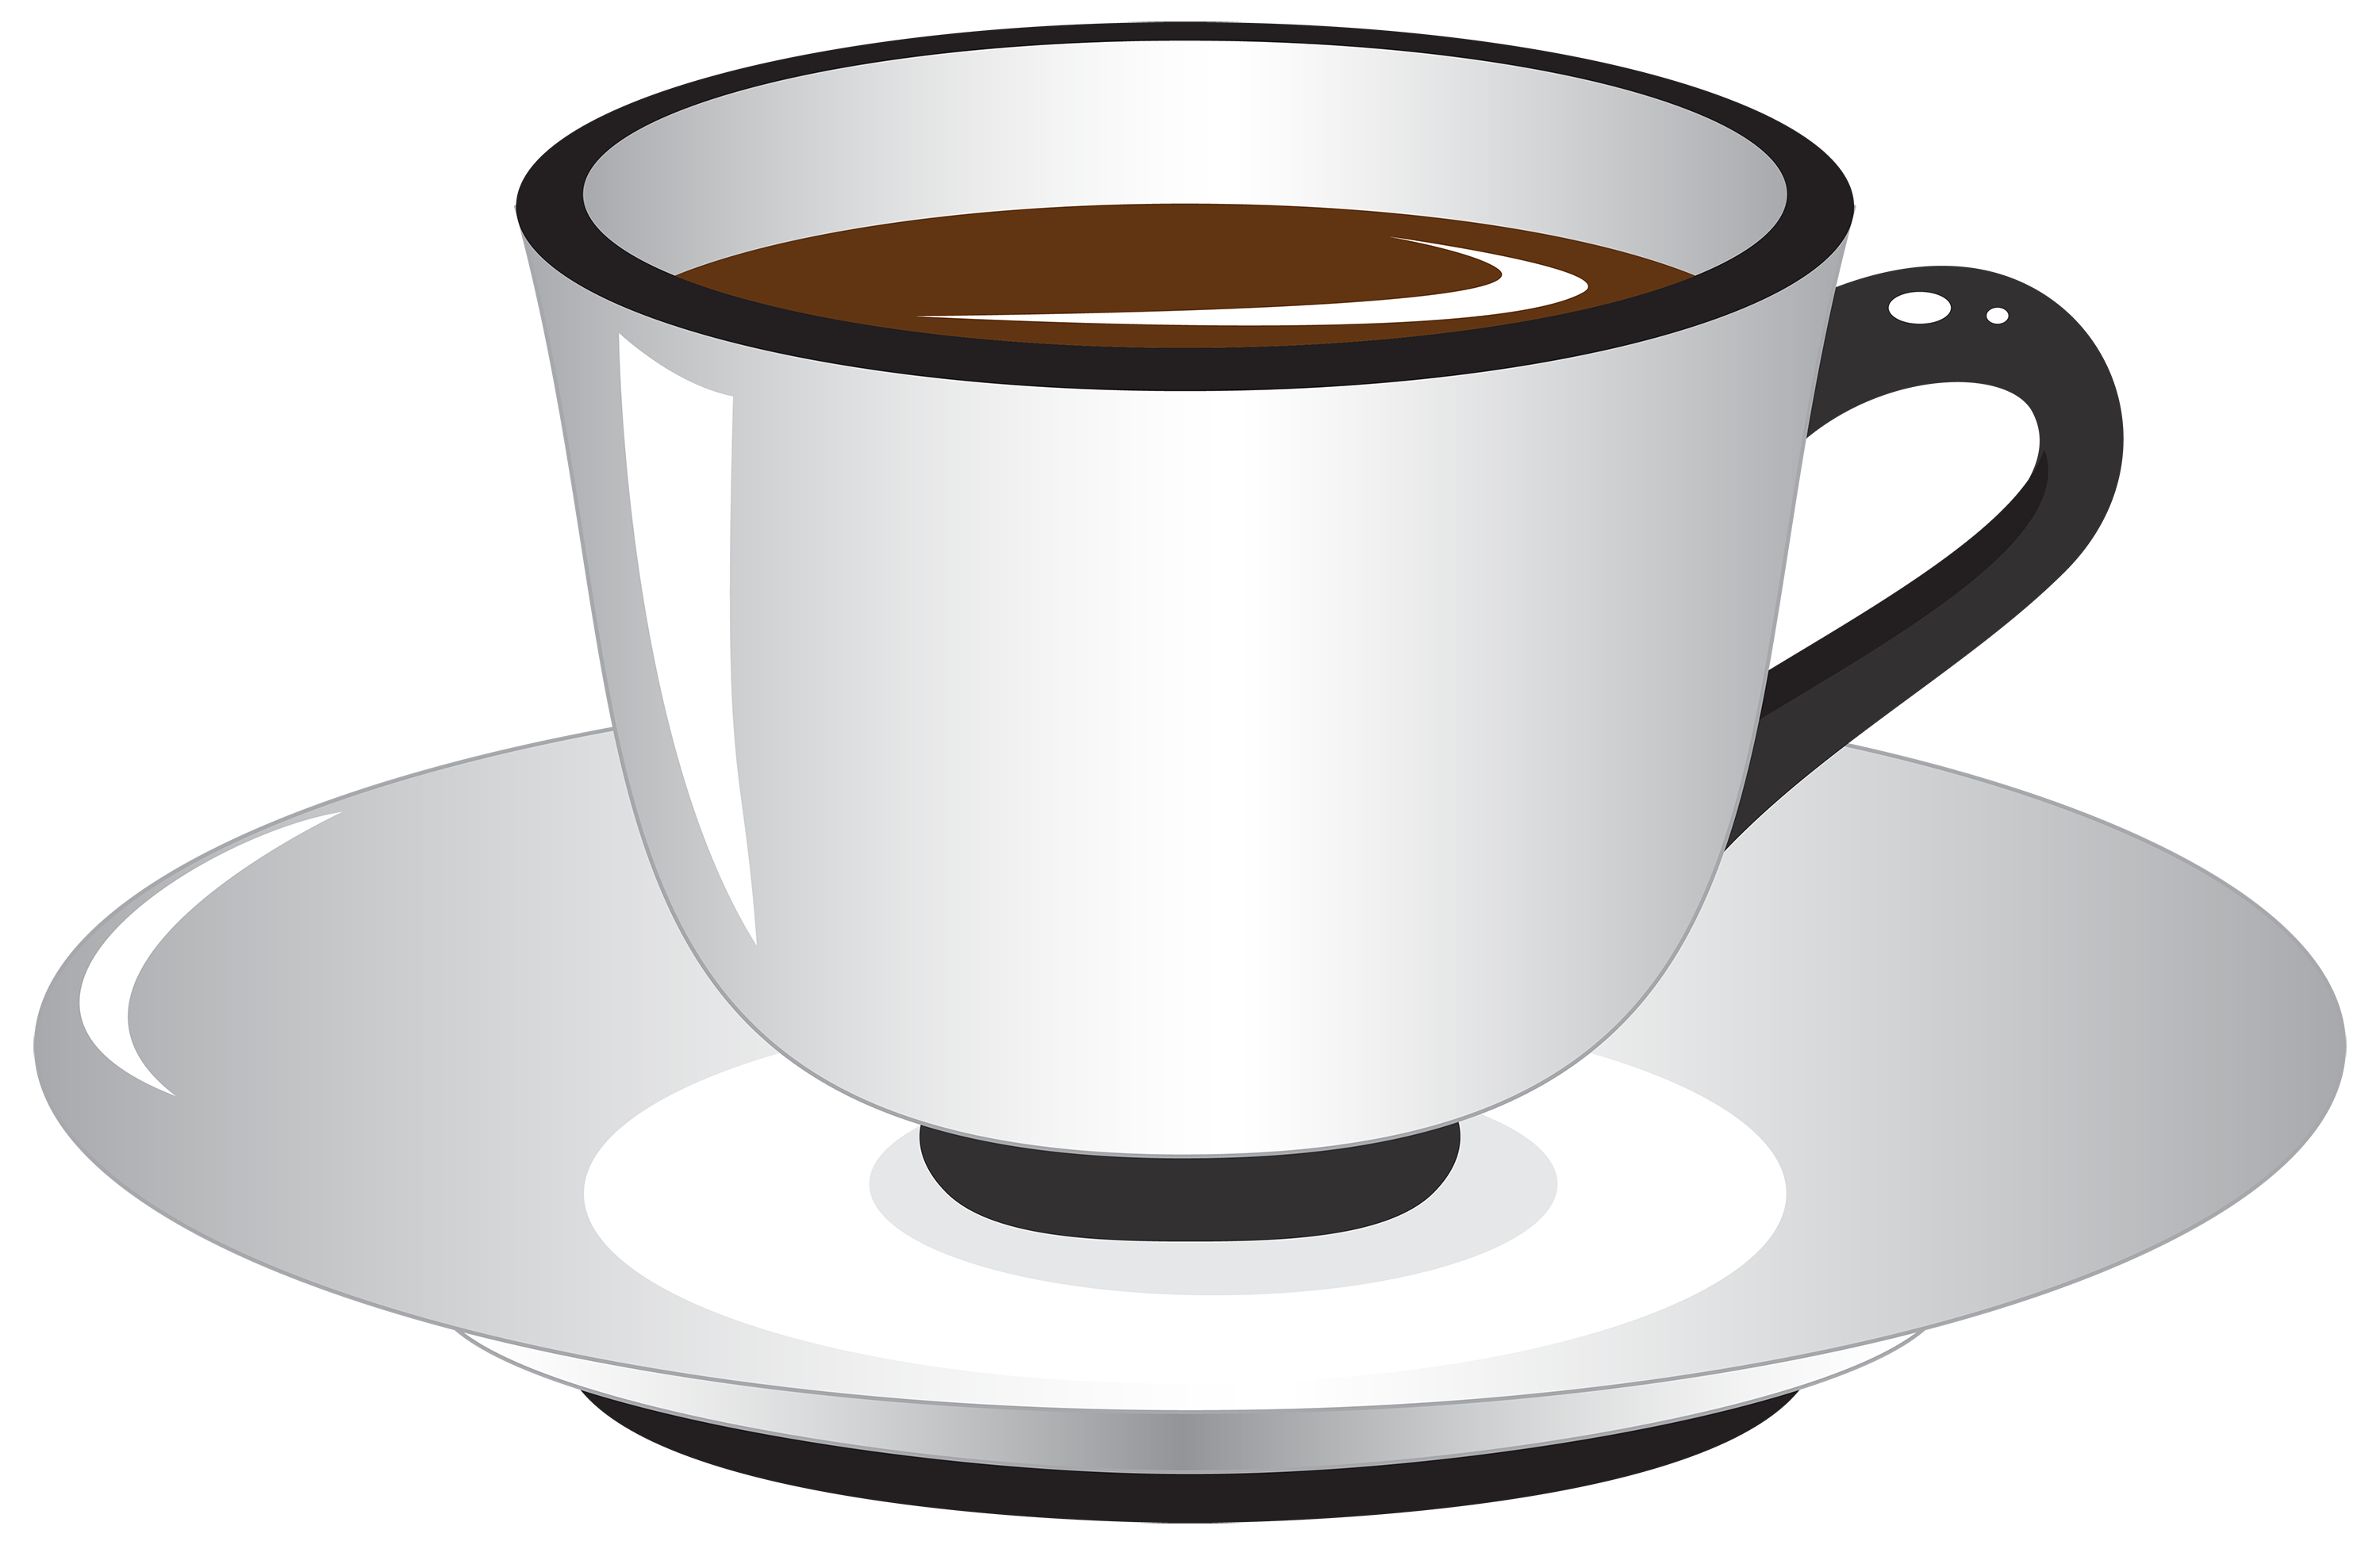 Coffee cup clipart vector 3 image